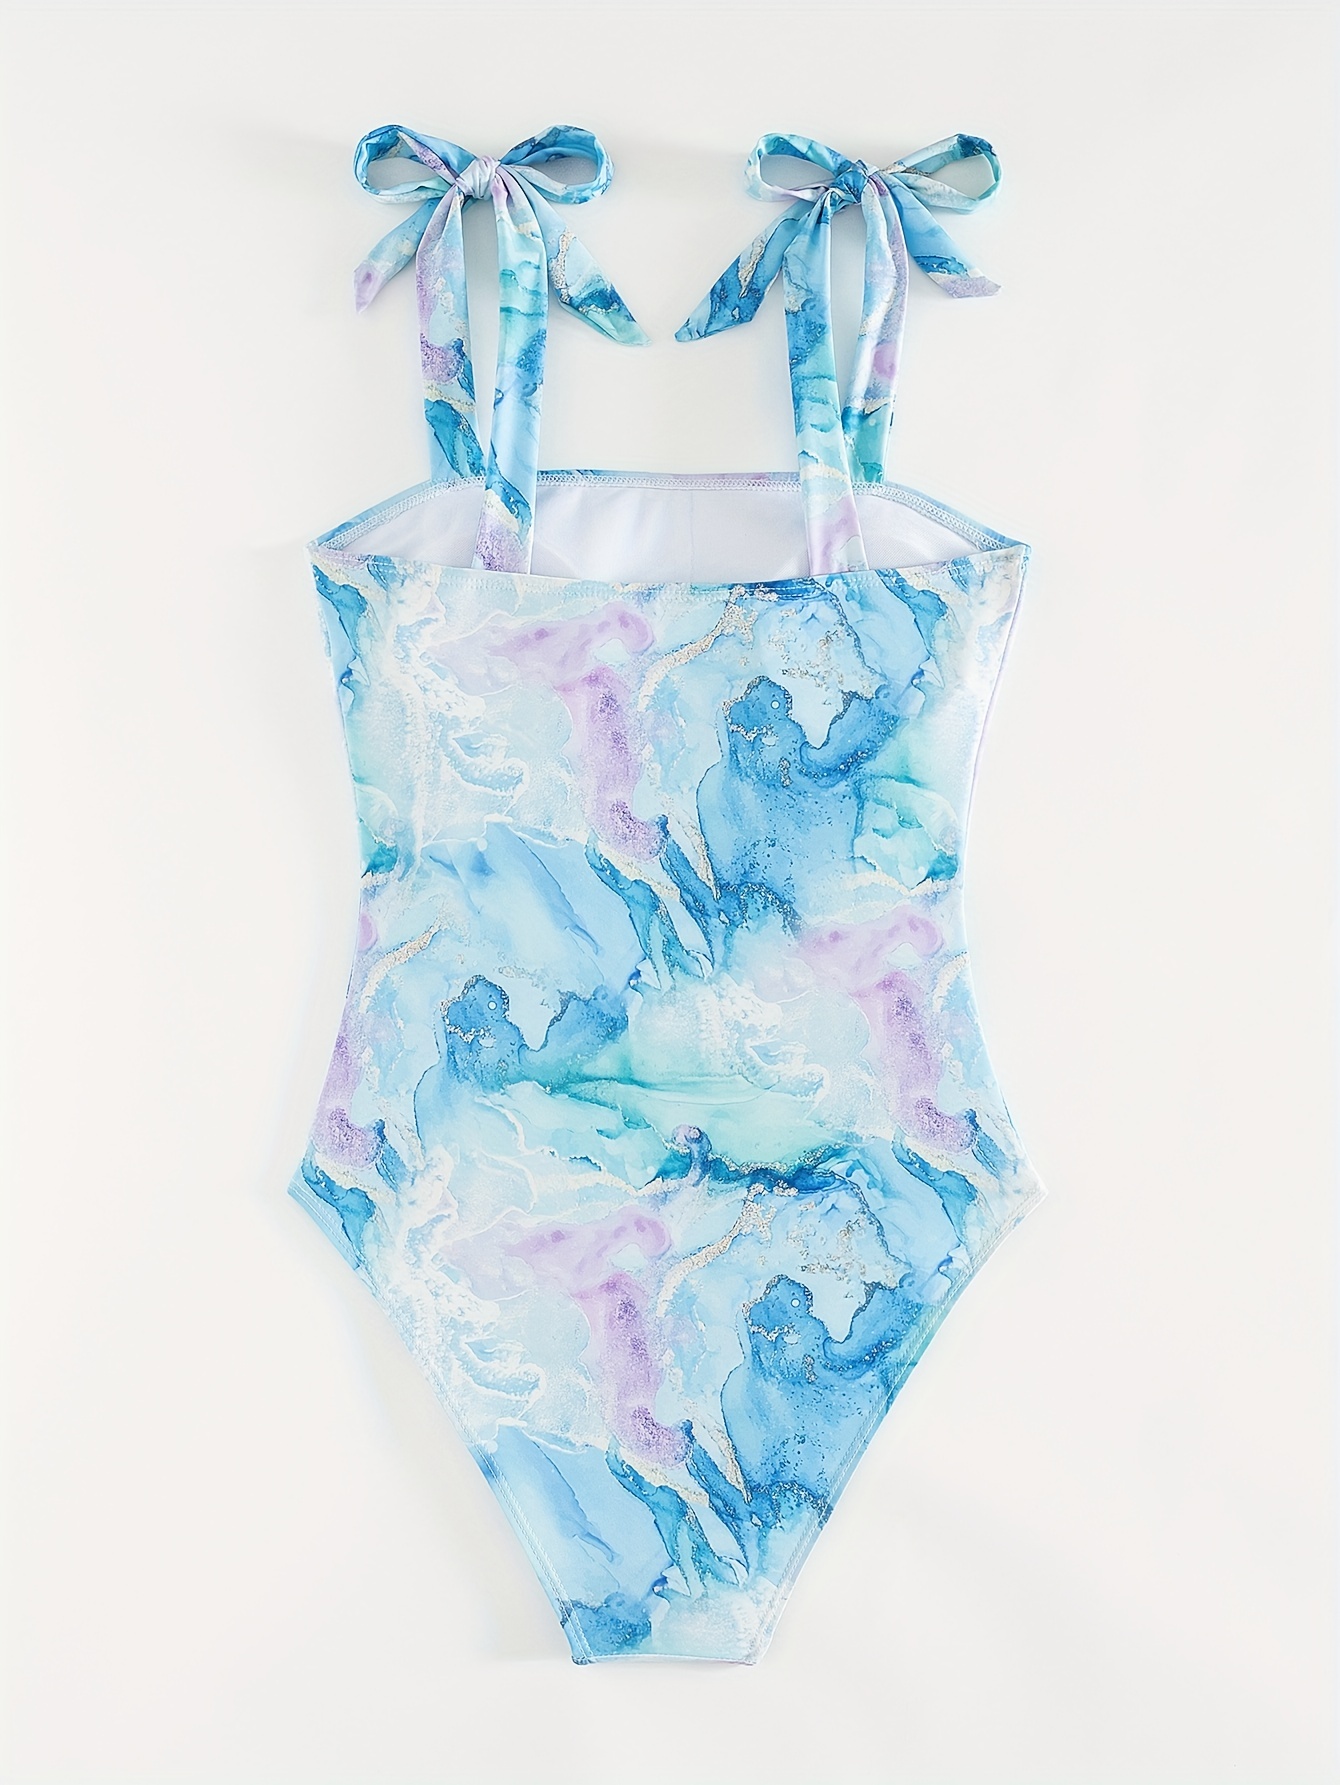 Women's Ombre Ombre * Swimsuit - Backless Tummy Control, Drawstring Tie  Side High Cut Bathing Suit - Perfect for Summer!